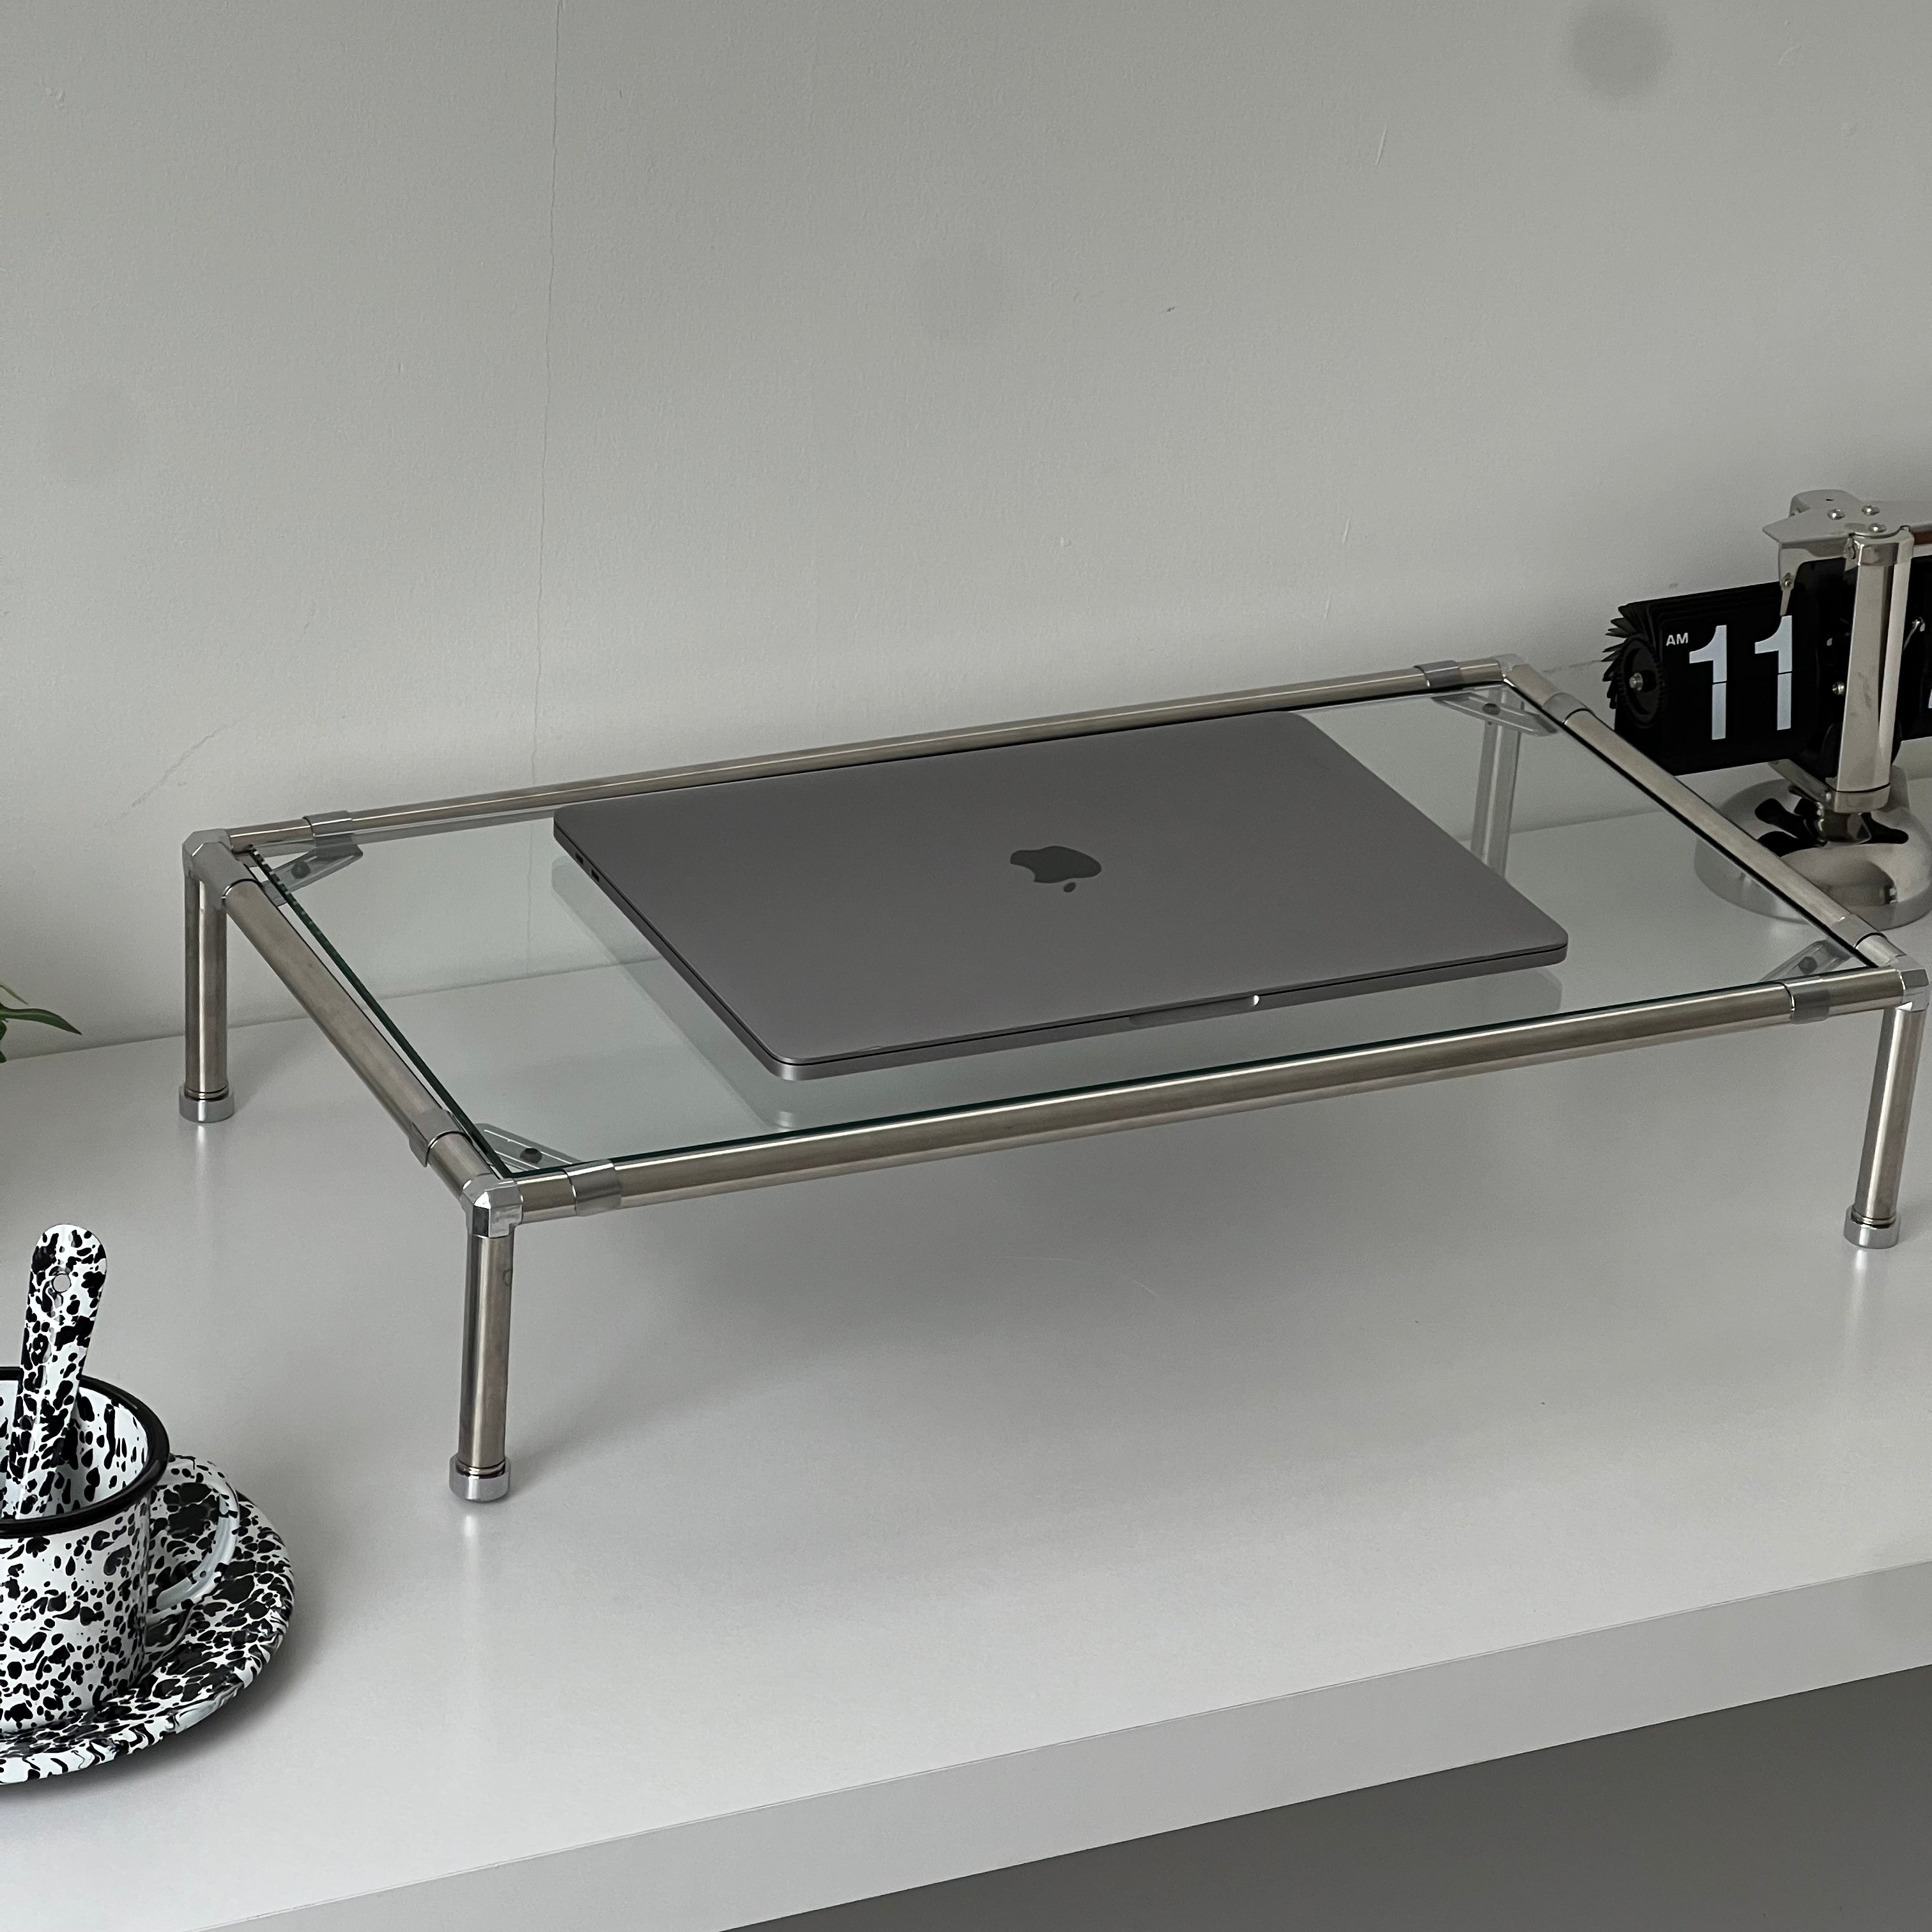 Tool PC stand-2